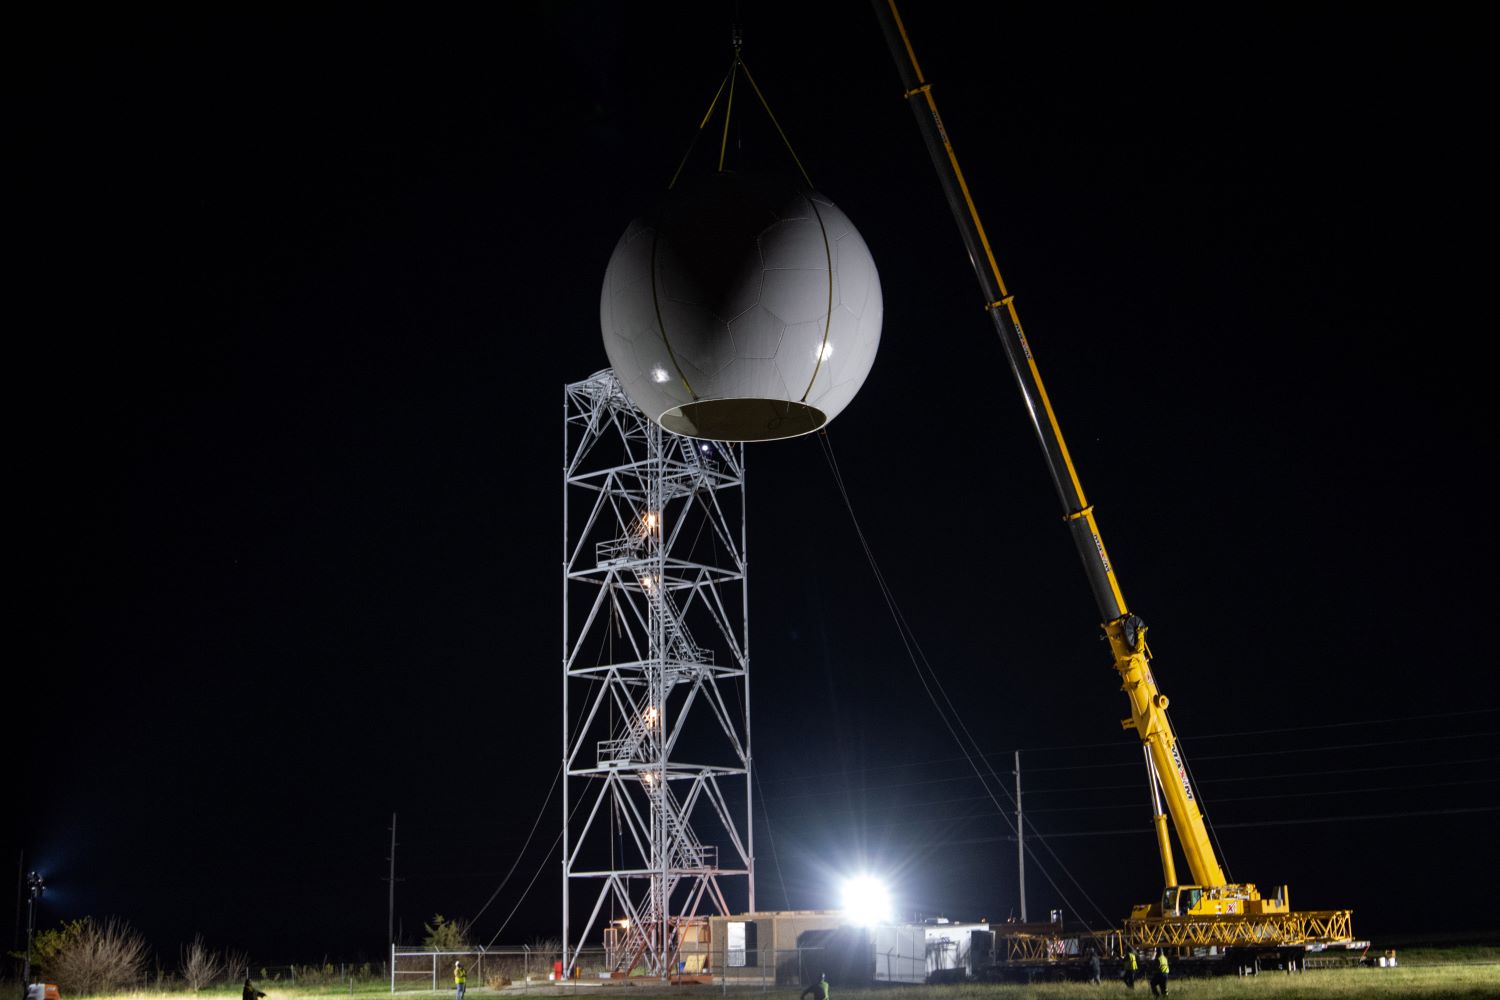 Radar dome being removed